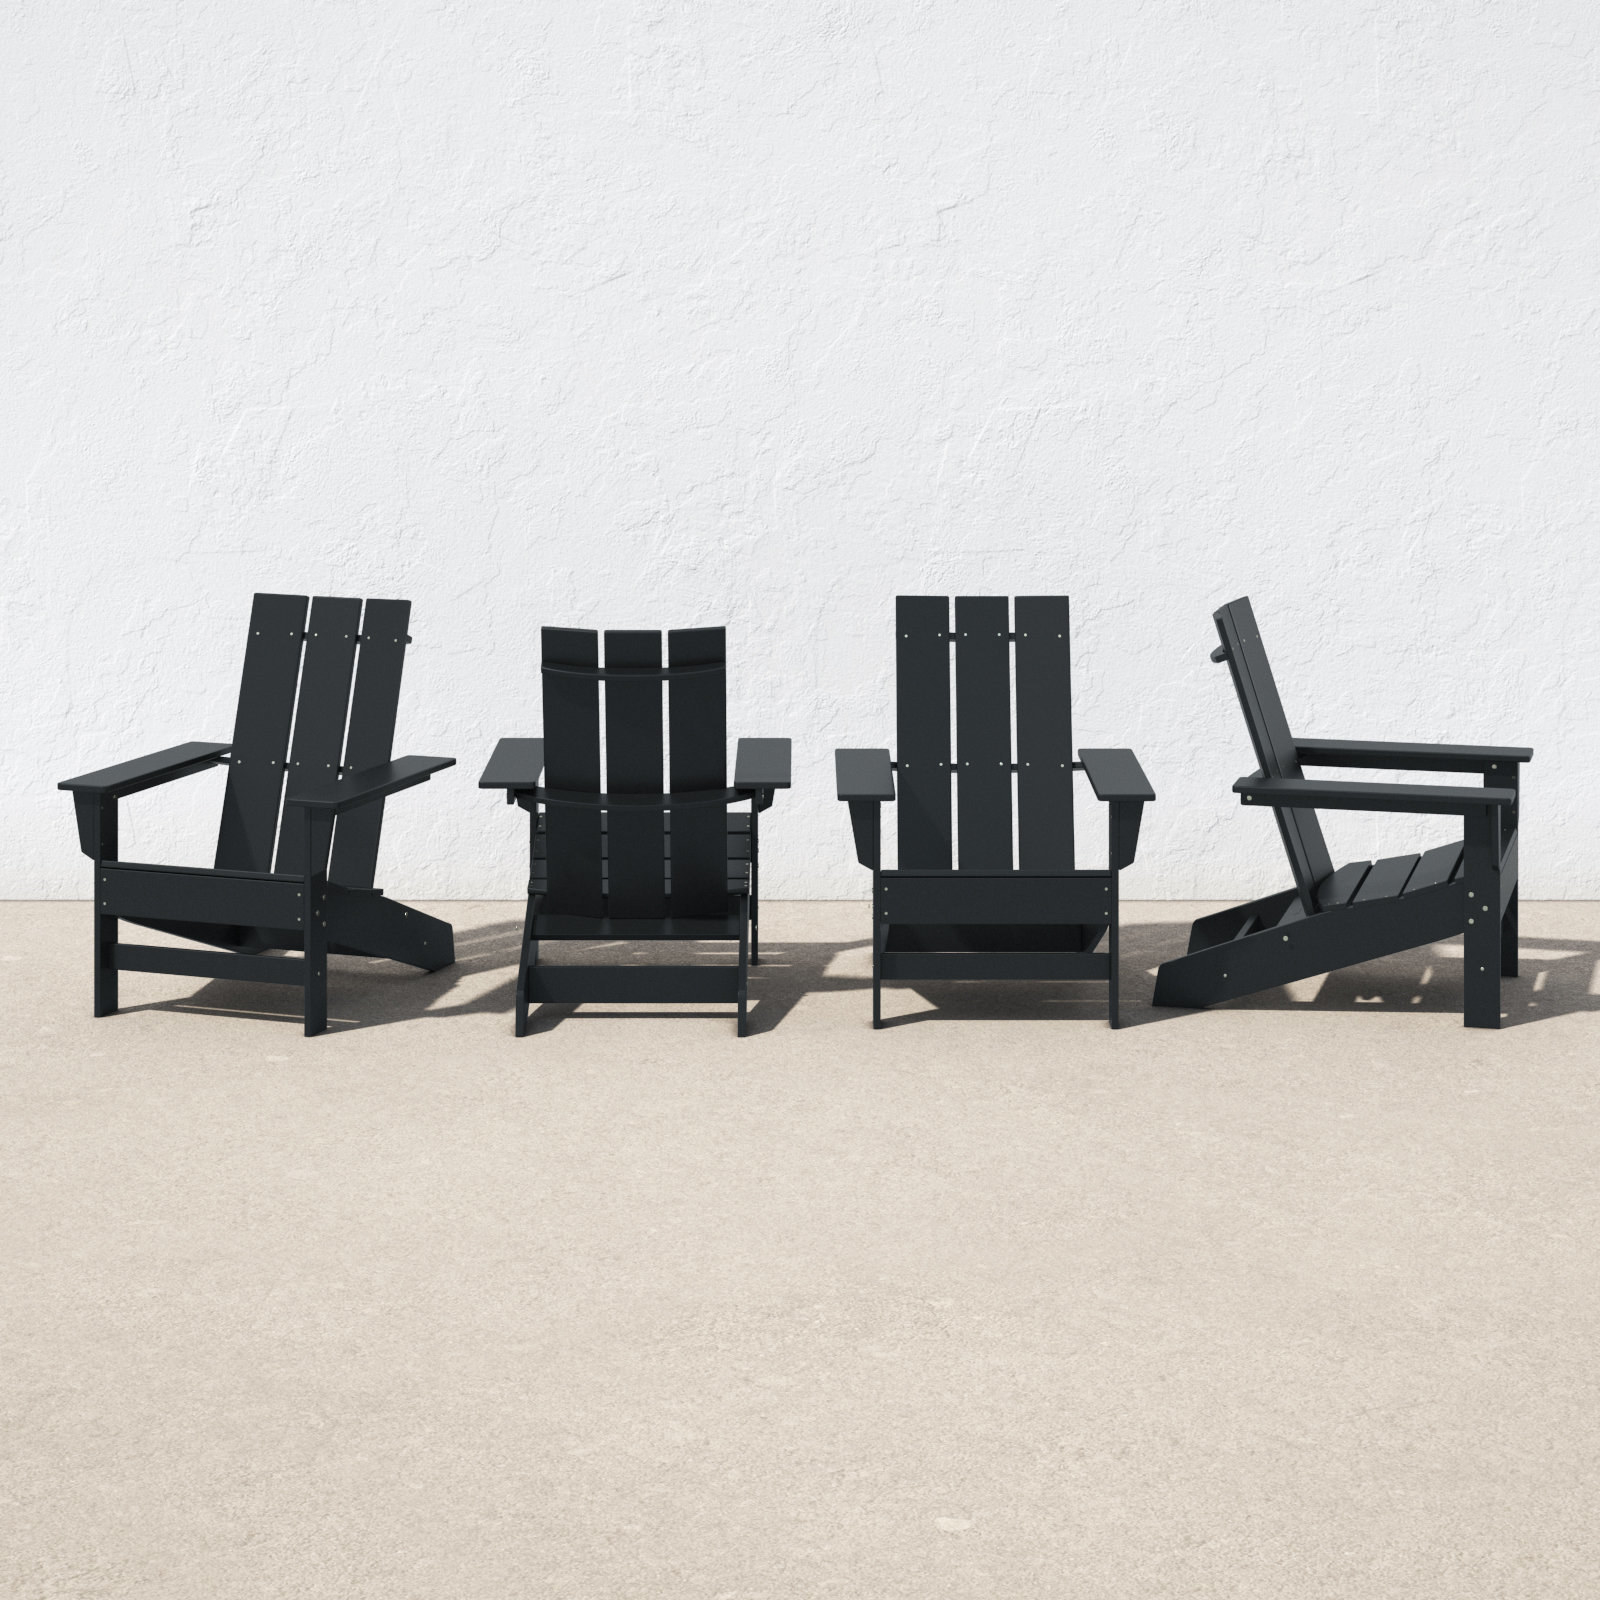 Image of four black chairs